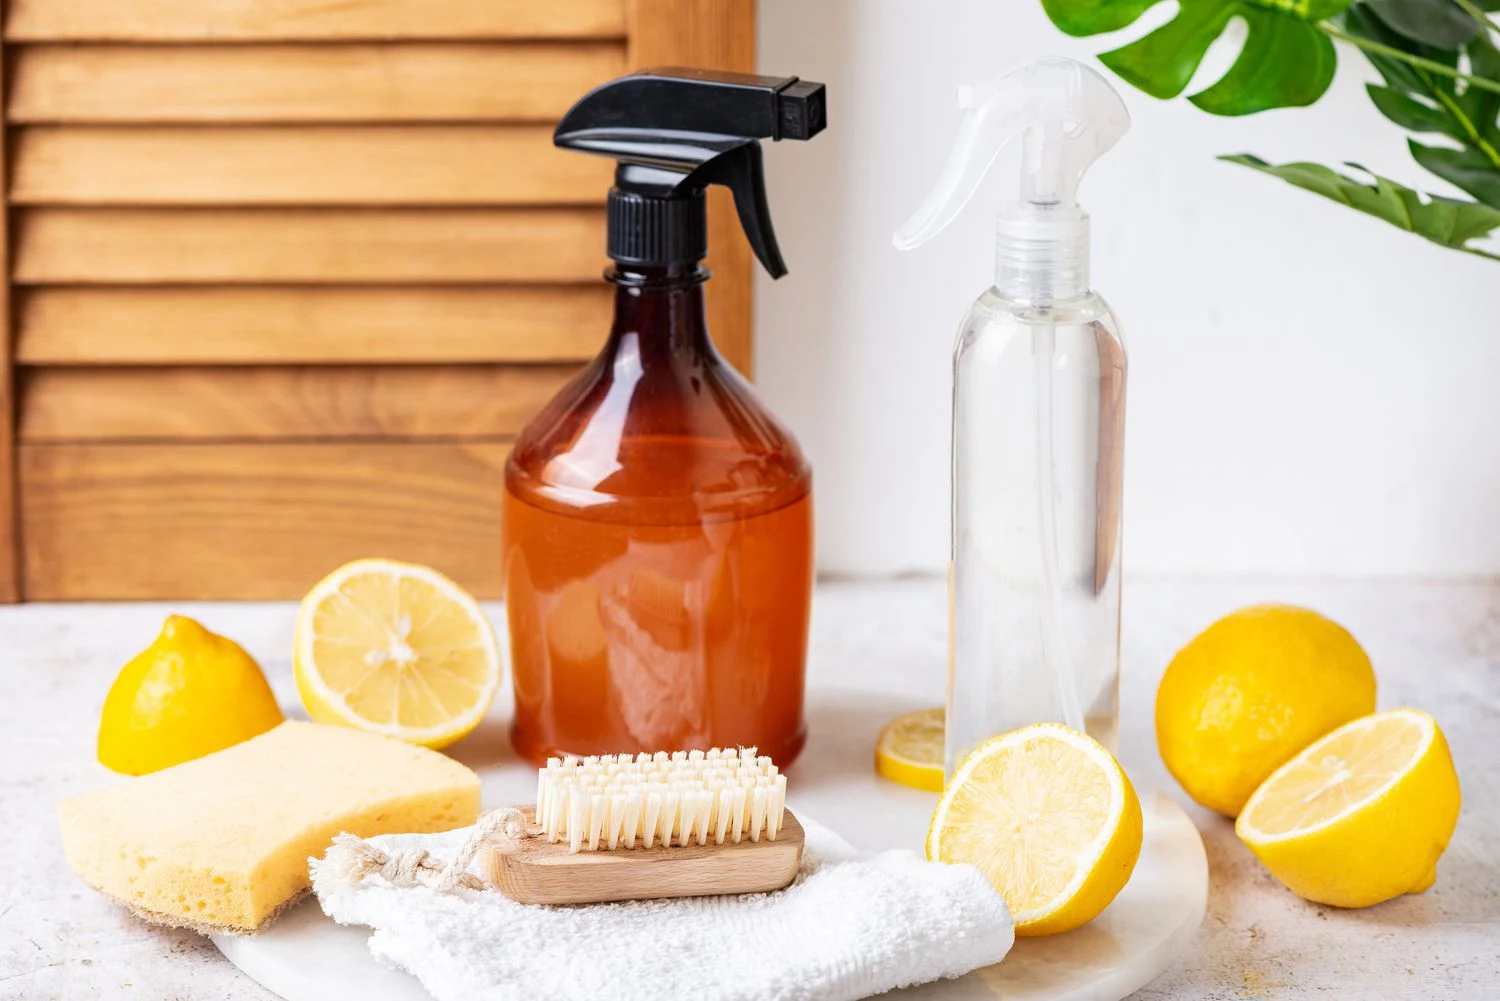 making your own citric acid spray